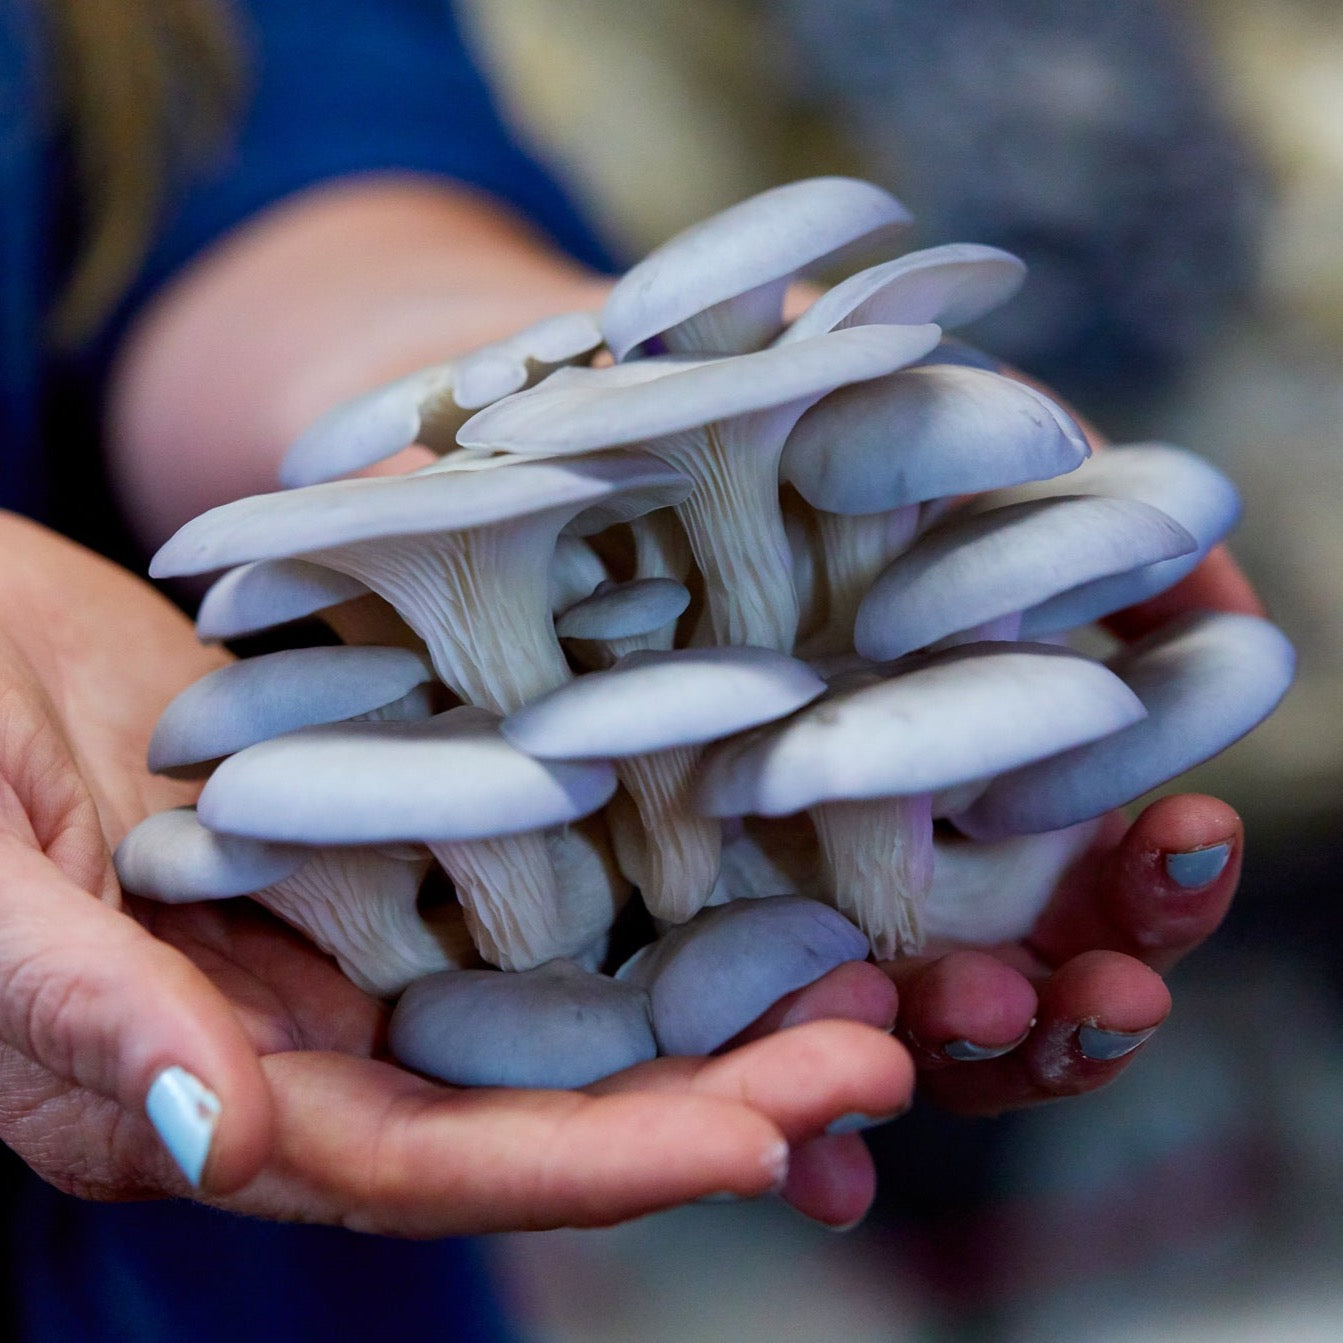 Cluster of fresh blue oyster mushrooms with velvety caps, exhibiting their distinct blue-gray color.